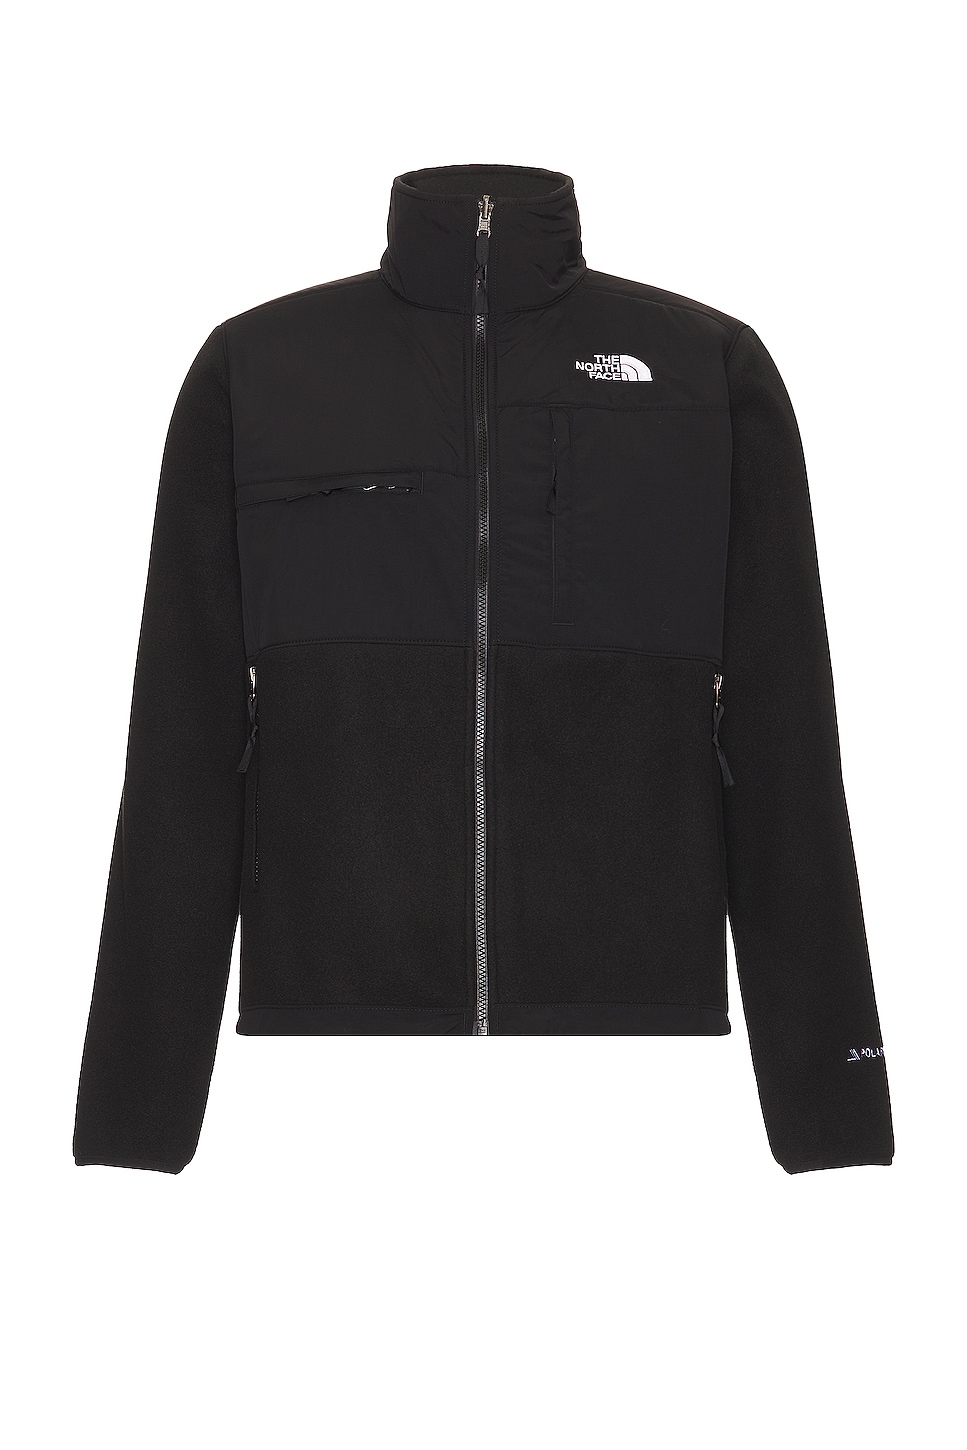 Image 1 of The North Face Denali Jacket in Tnf Black